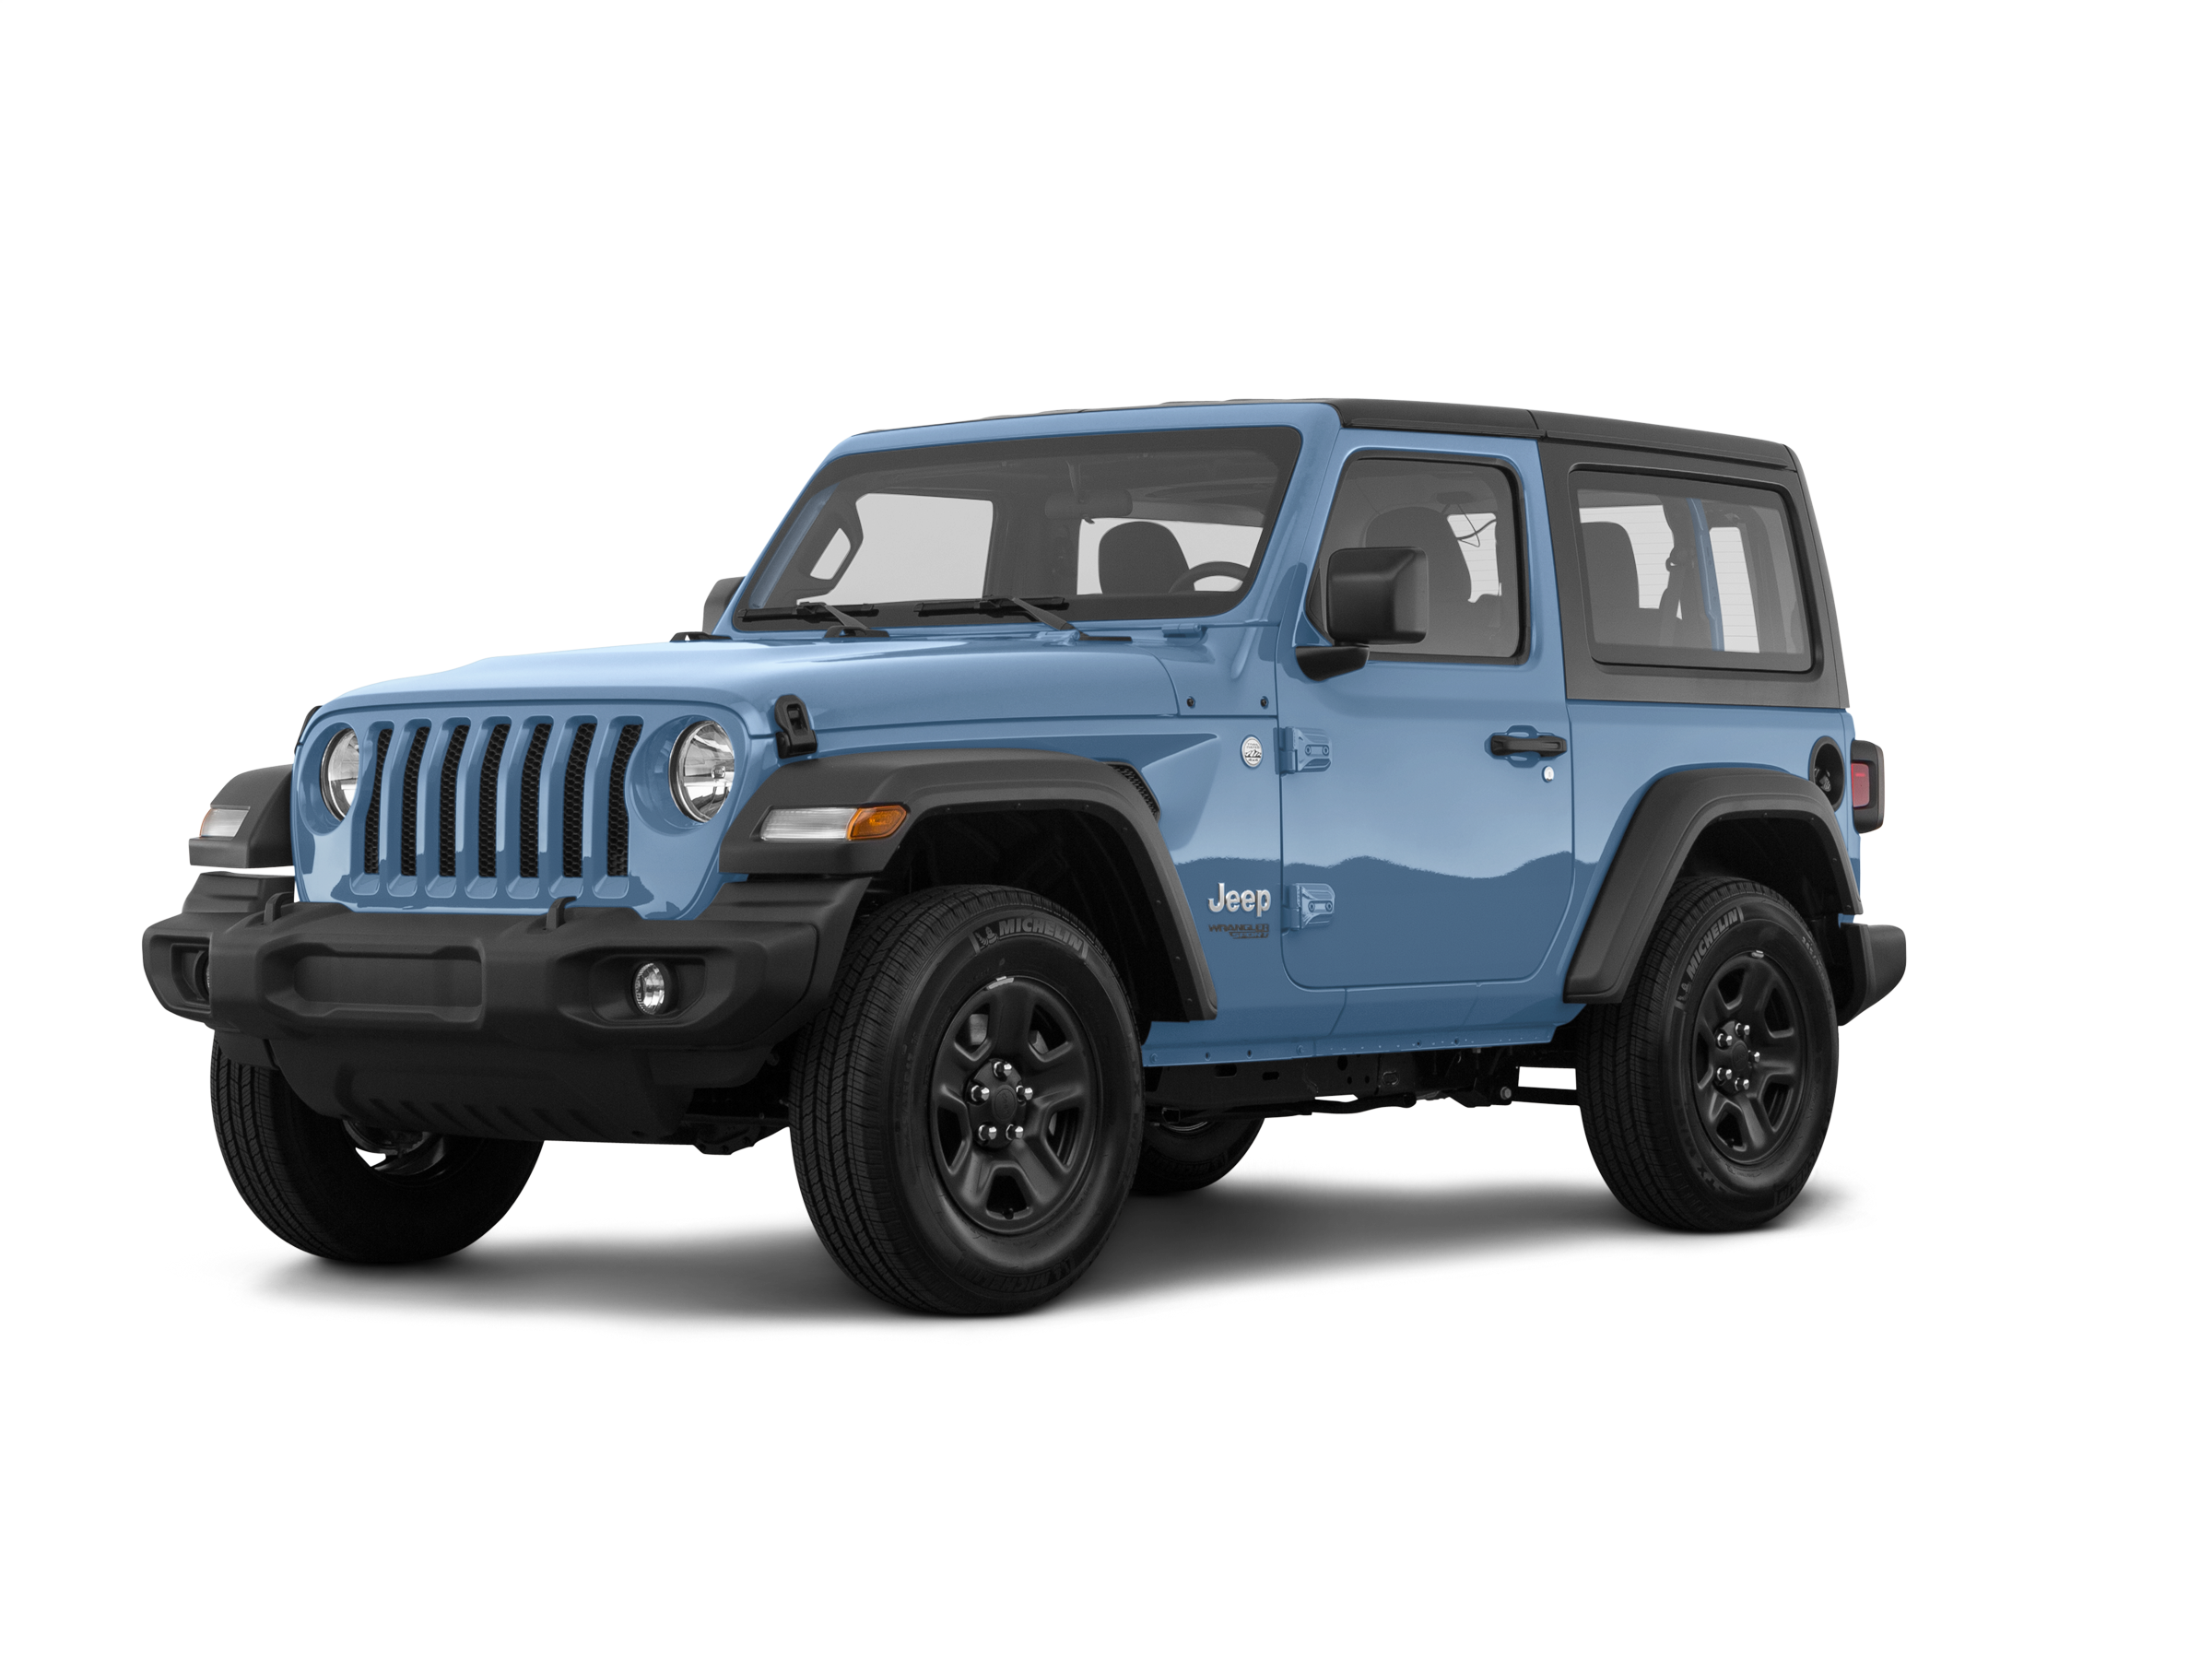 2019 Jeep Wrangler Values & Cars for Sale | Kelley Blue Book